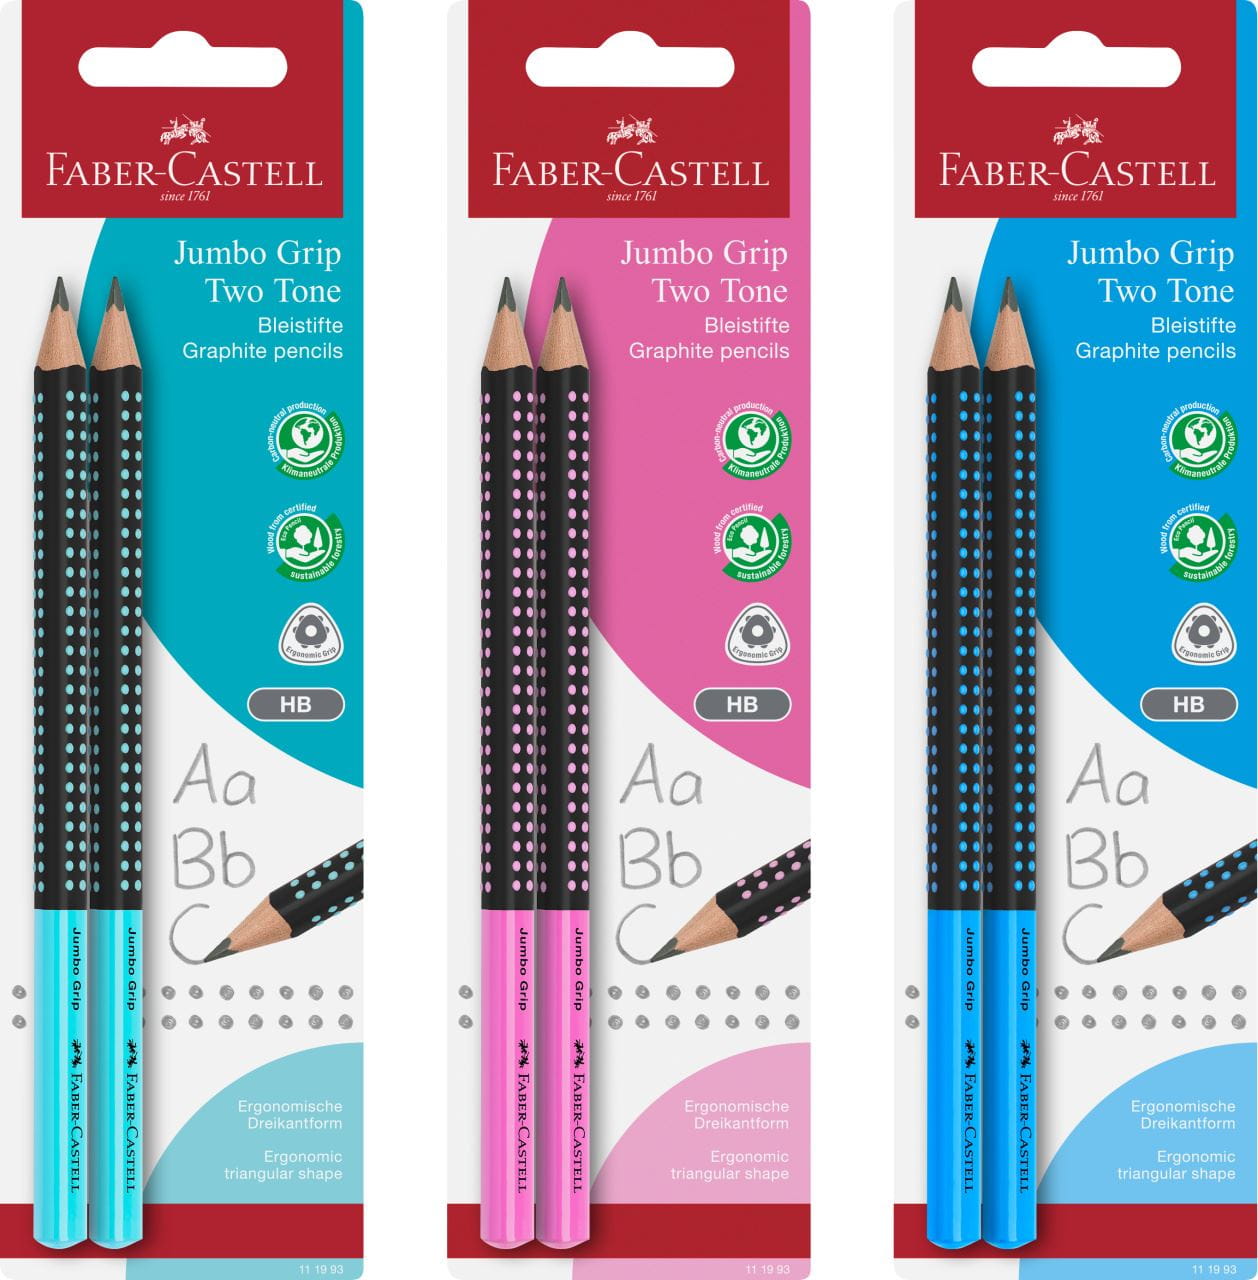 Faber-Castell - Two Tone Jumbo Grip graphite pencil, HB, 2 pieces